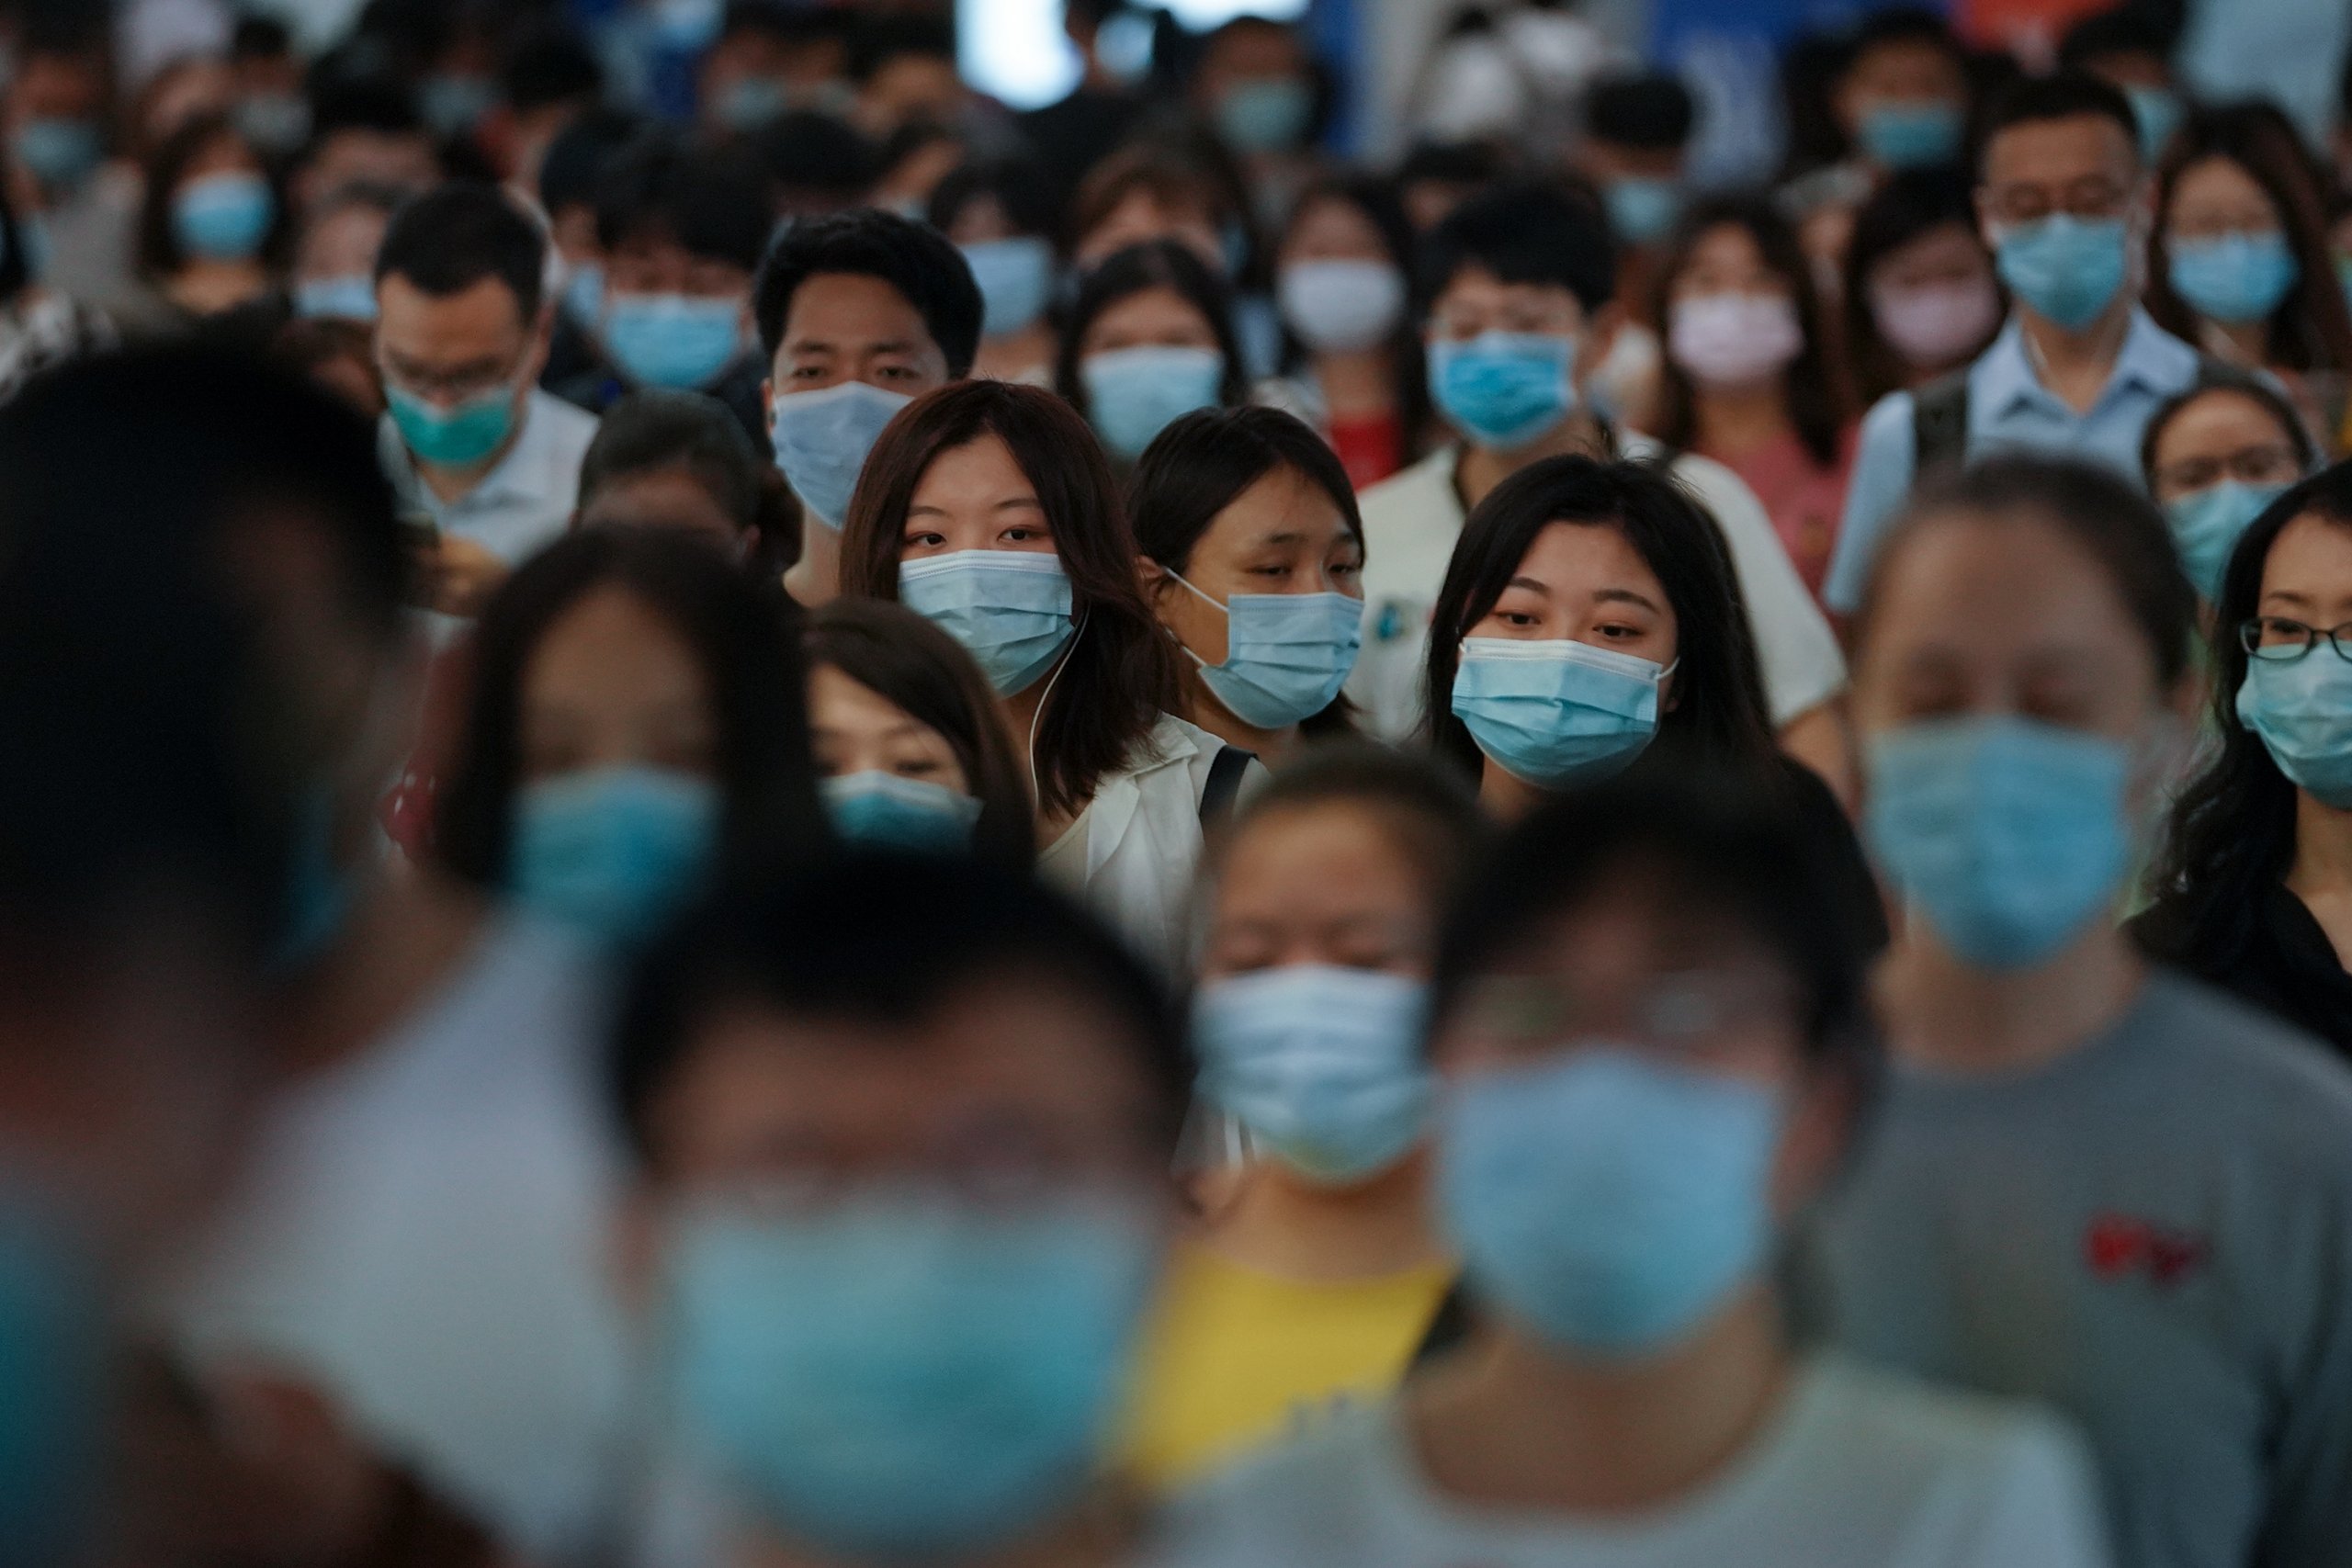 People wearing face masks walk in a subway station during morning rush hour on July 20, 2020 in Beijing, China